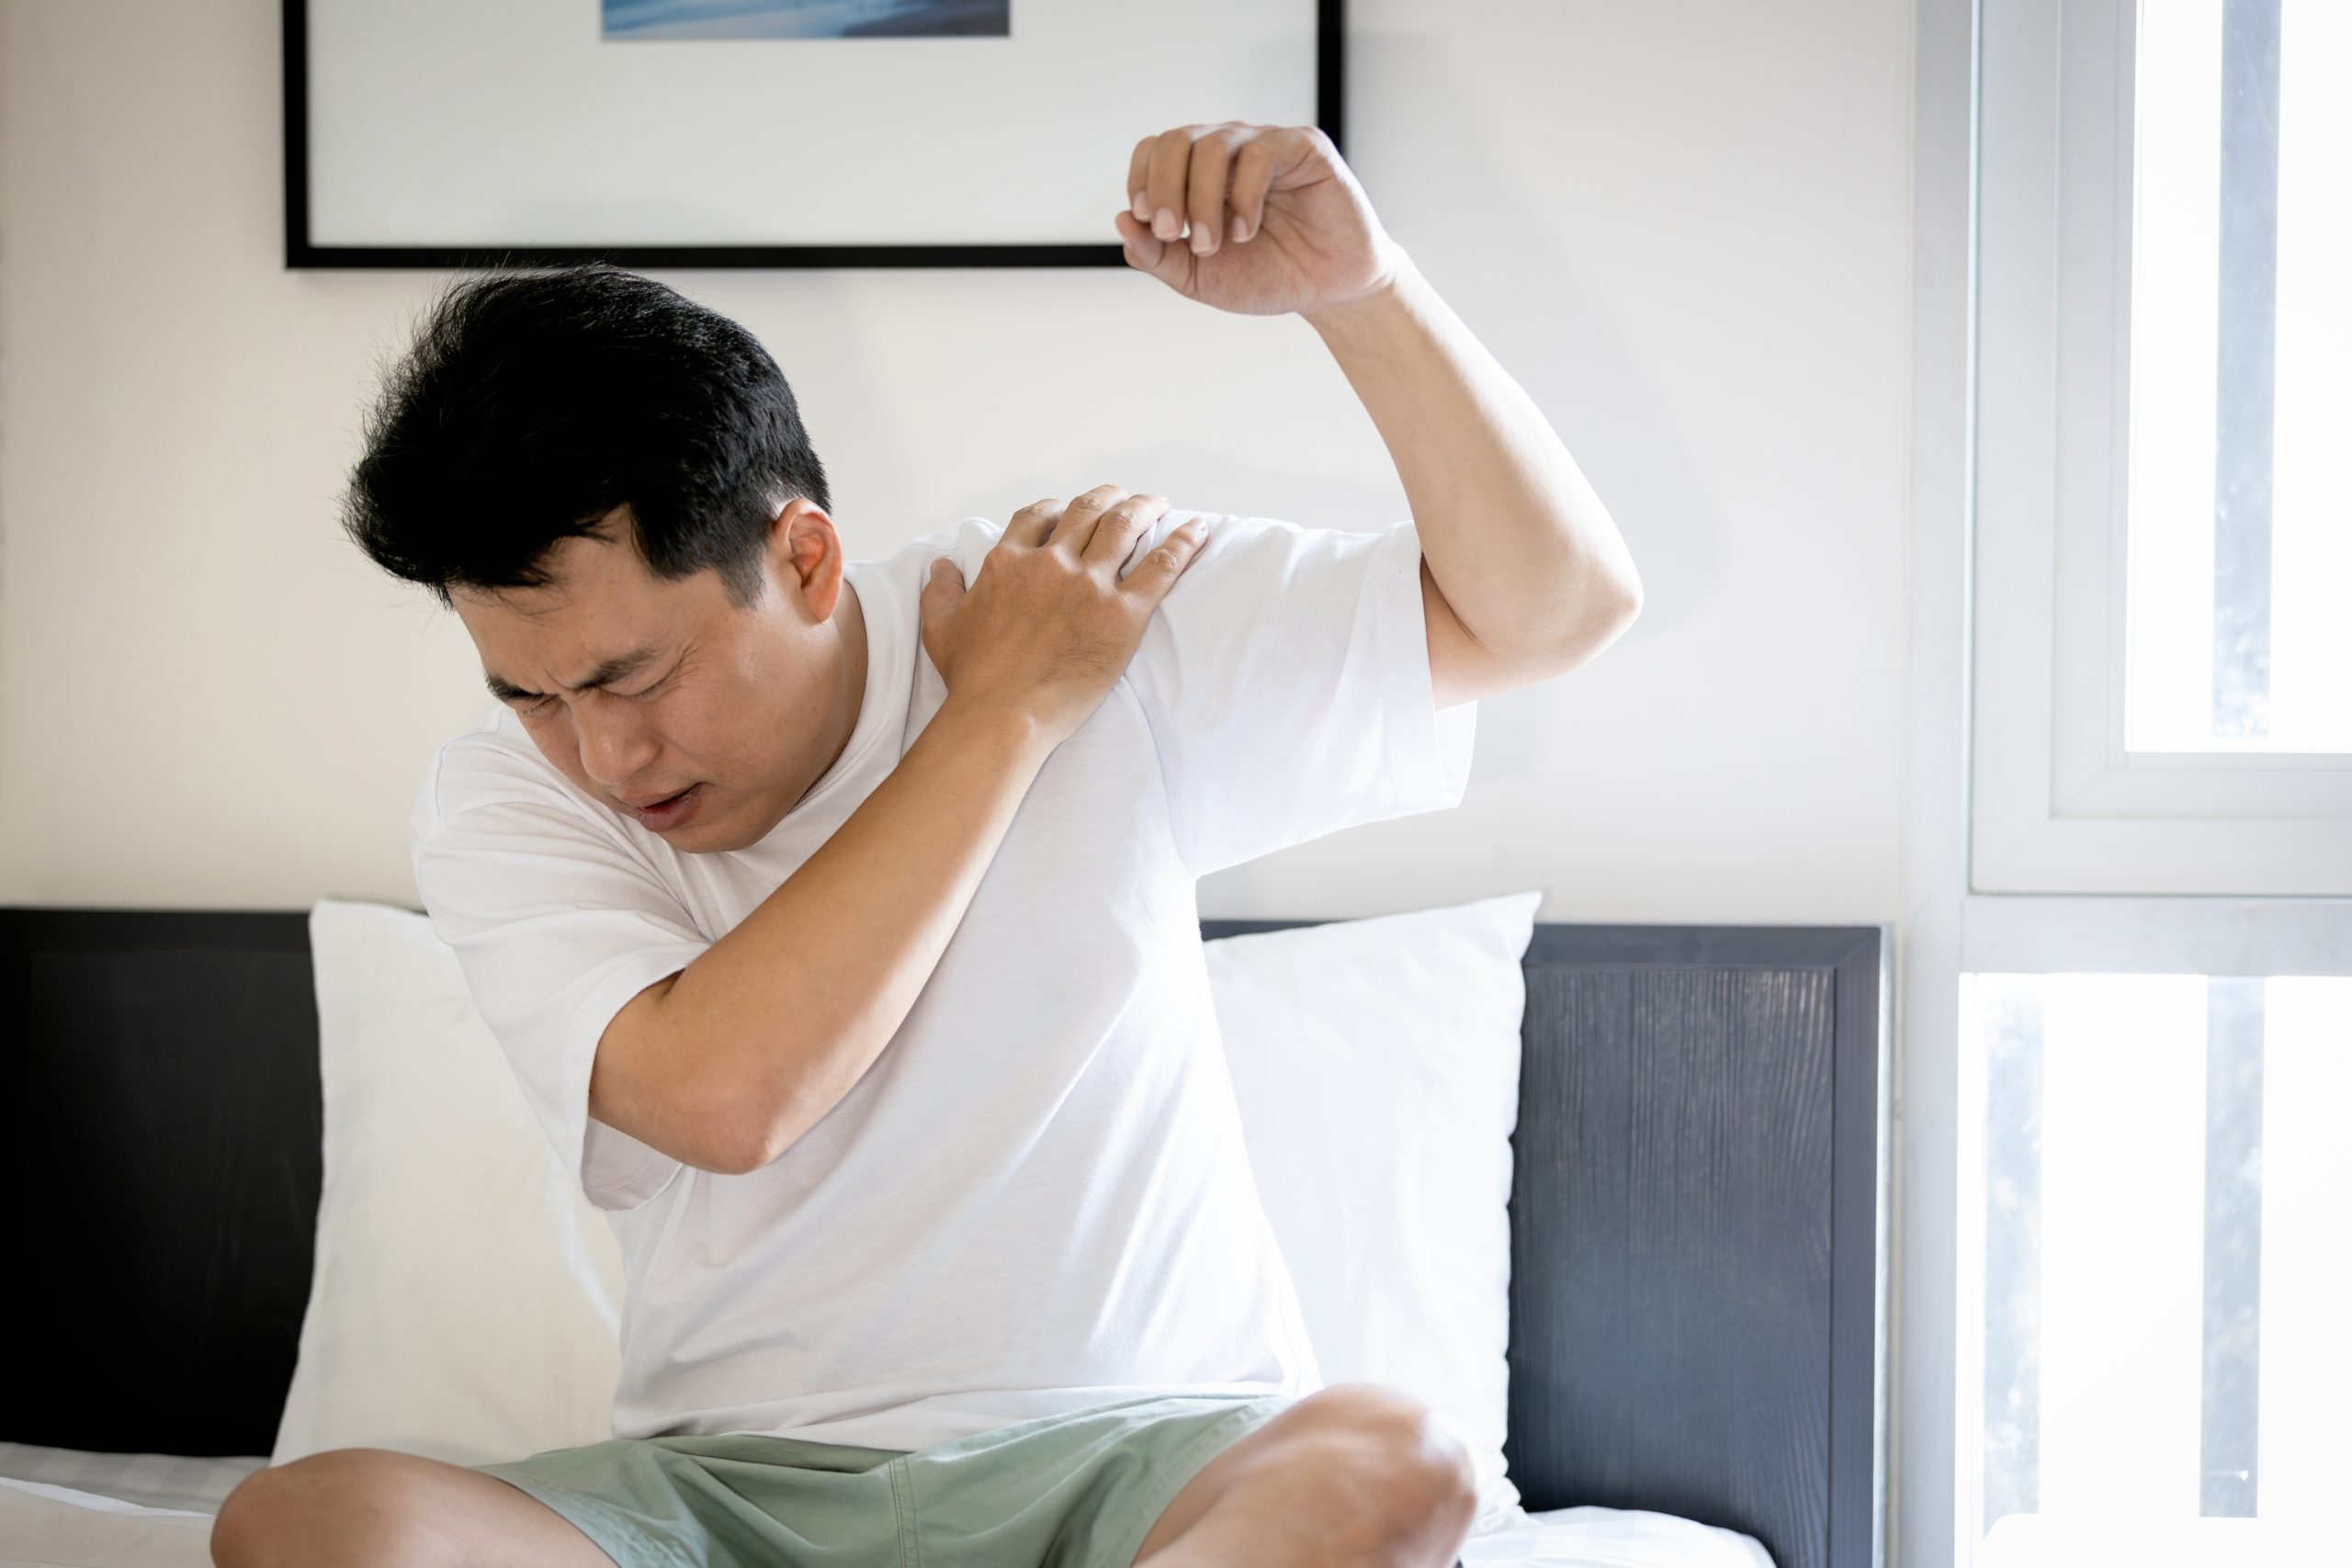 Chiropractic Care For Shoulder Pain Near Lynnwood, WA